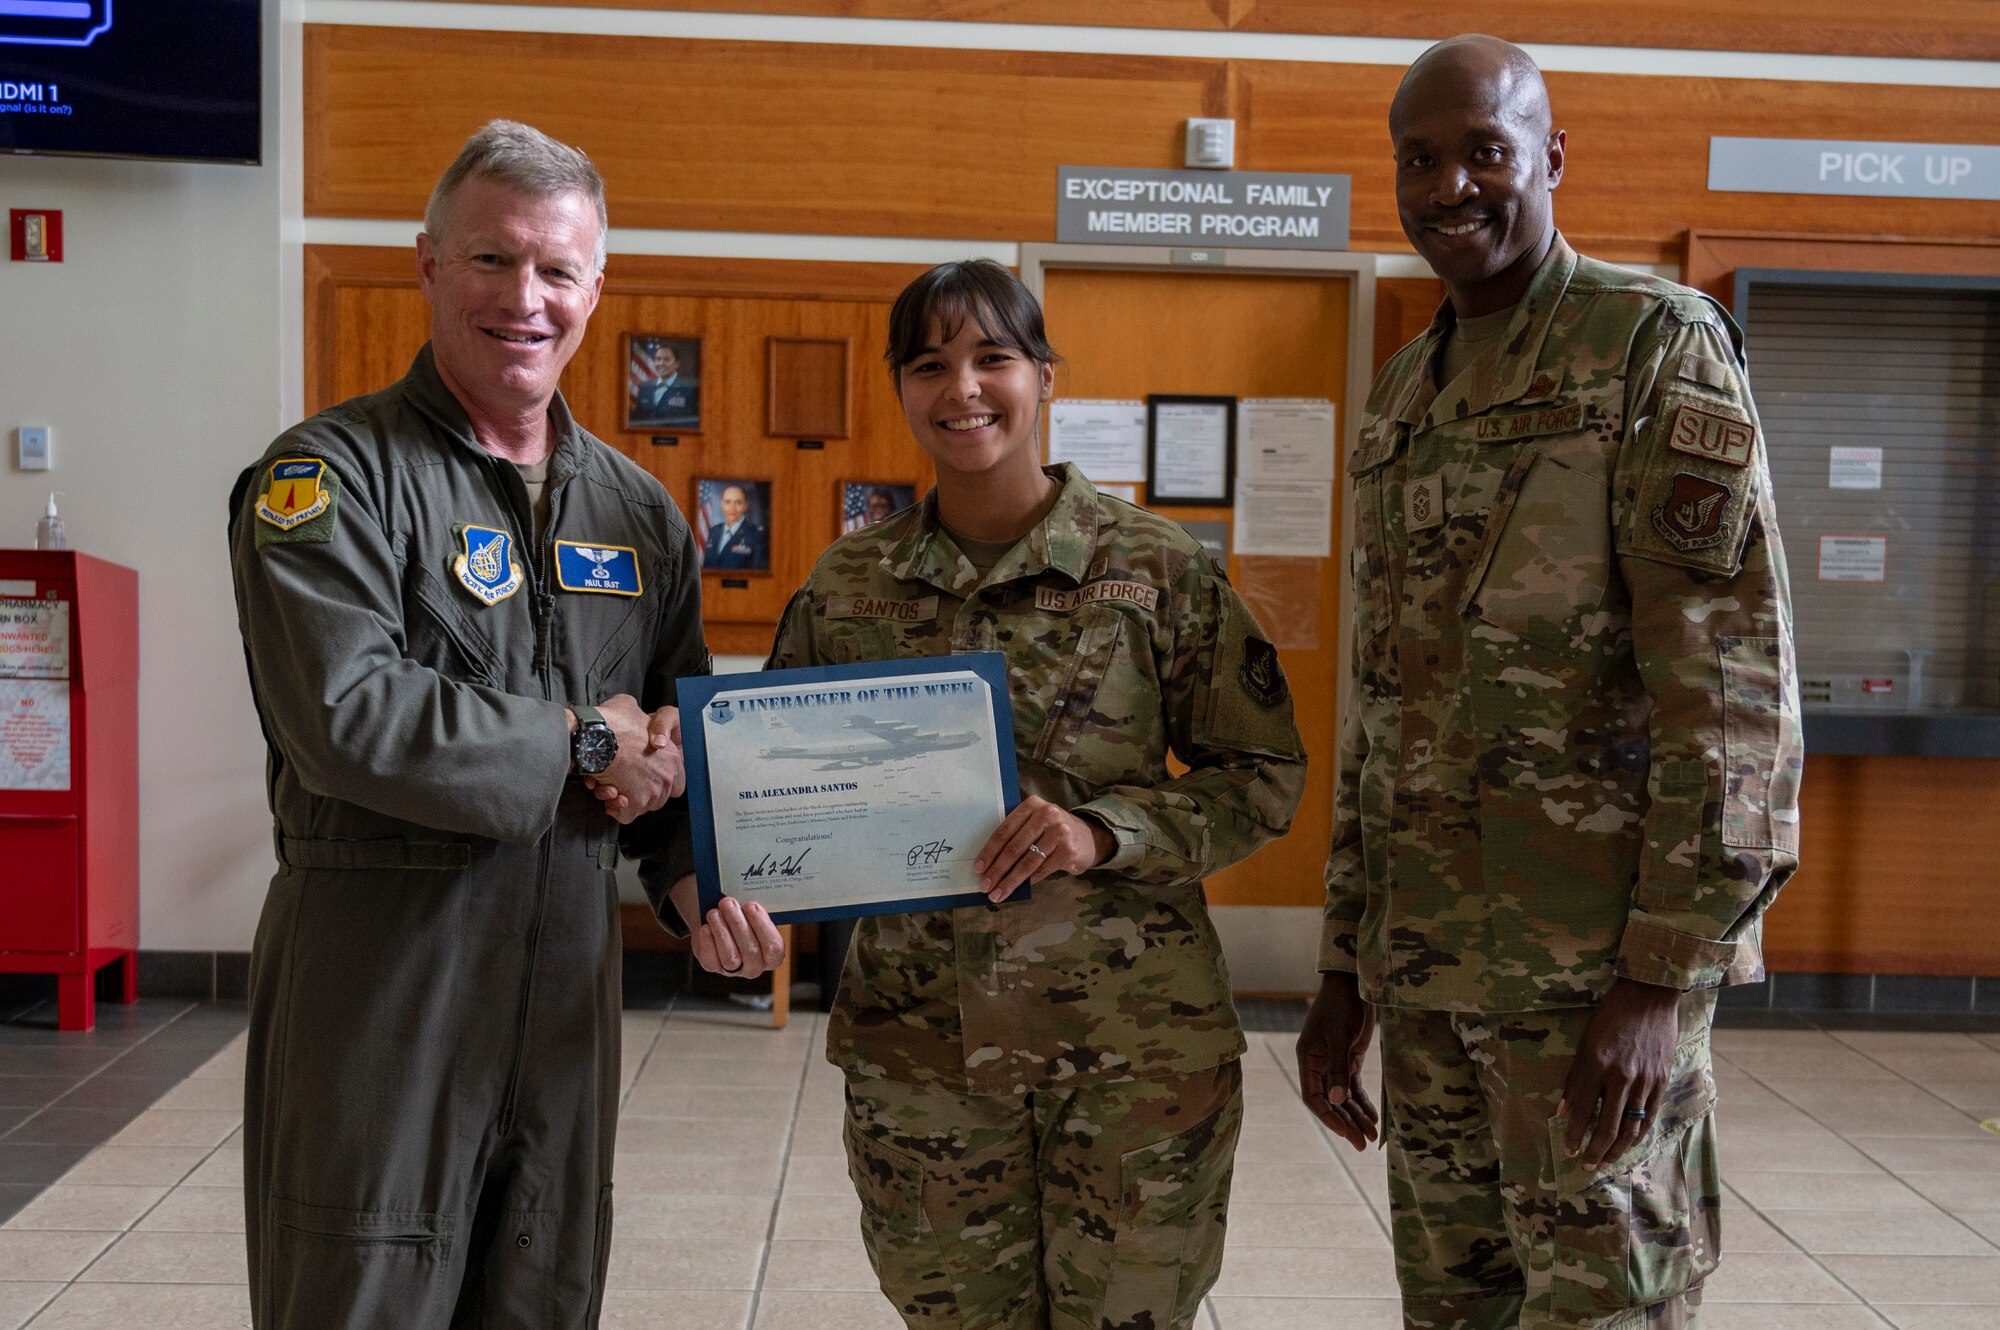 U.S. Air Force Senior Airman Alexandra Santos, dental prophylaxis technician assigned to the 36th Occupational Medical Readiness Squadron, receives the Linebacker of the Week Award from U.S. Air Force Brig. Gen. Paul Fast, commander of the 36th Wing, and U.S. Air Force Chief Master Sgt. Nicholas Taylor, the command chief of the 36th Wing, at Andersen Air Force Base, Guam, June 7, 2023. The Team Andersen Linebacker of the Week recognizes outstanding enlisted, officer, civilian and total force personnel who have had an impact on achieving Team Andersen’s mission, vision and priorities. (U.S. Air Force photo by Airman 1st Class Emily Saxton)